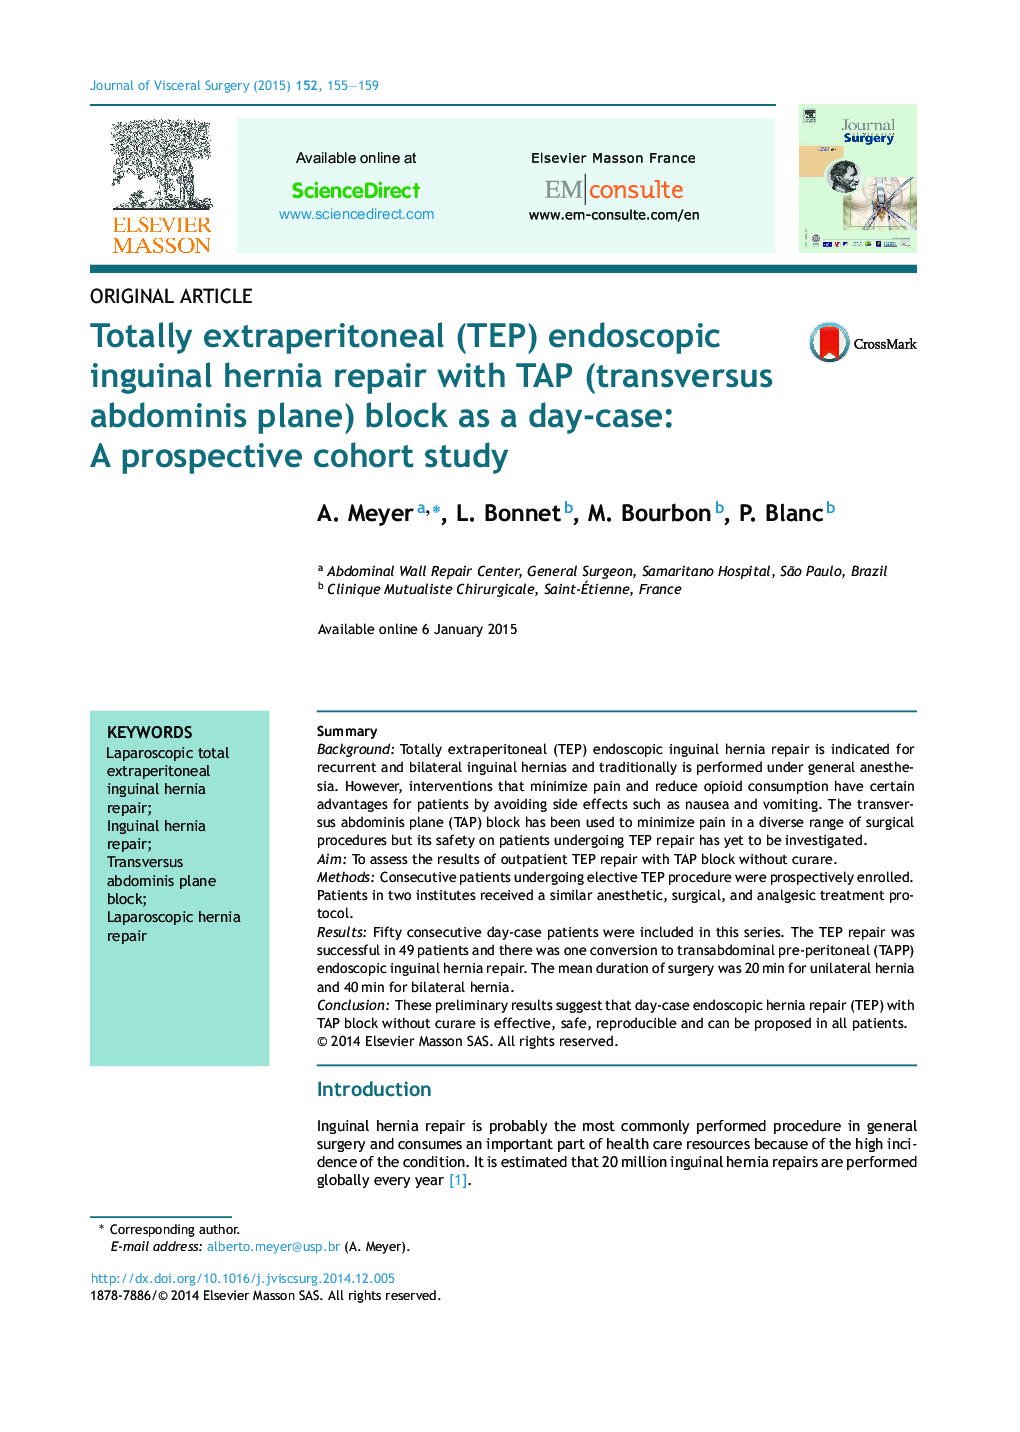 Original articleTotally extraperitoneal (TEP) endoscopic inguinal hernia repair with TAP (transversus abdominis plane) block as a day-case: A prospective cohort study